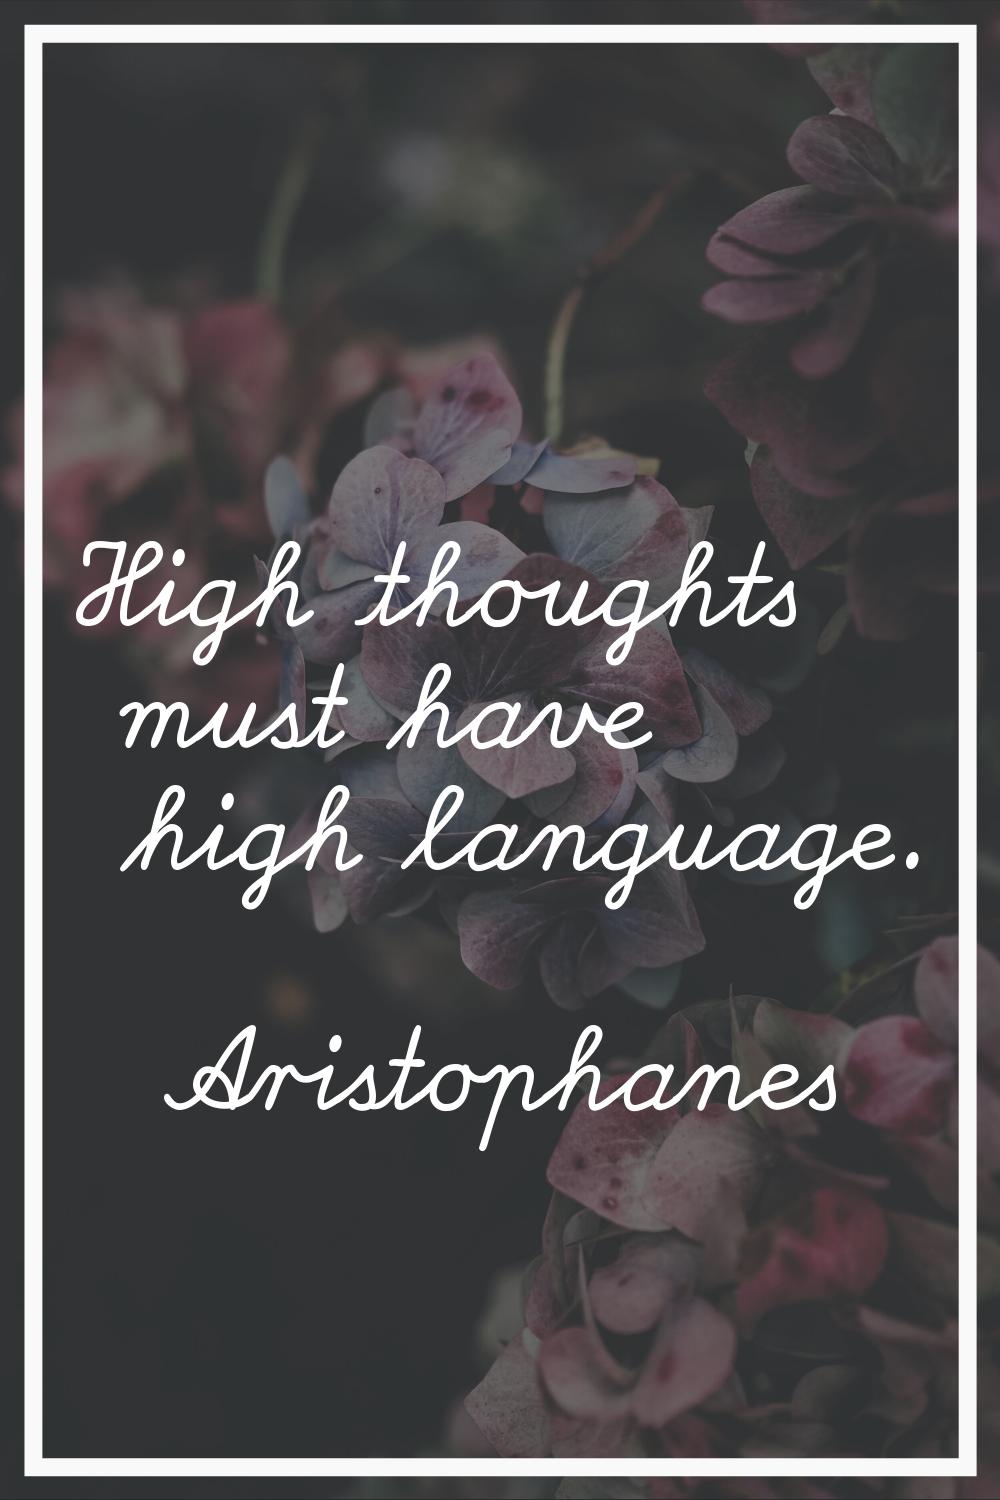 High thoughts must have high language.